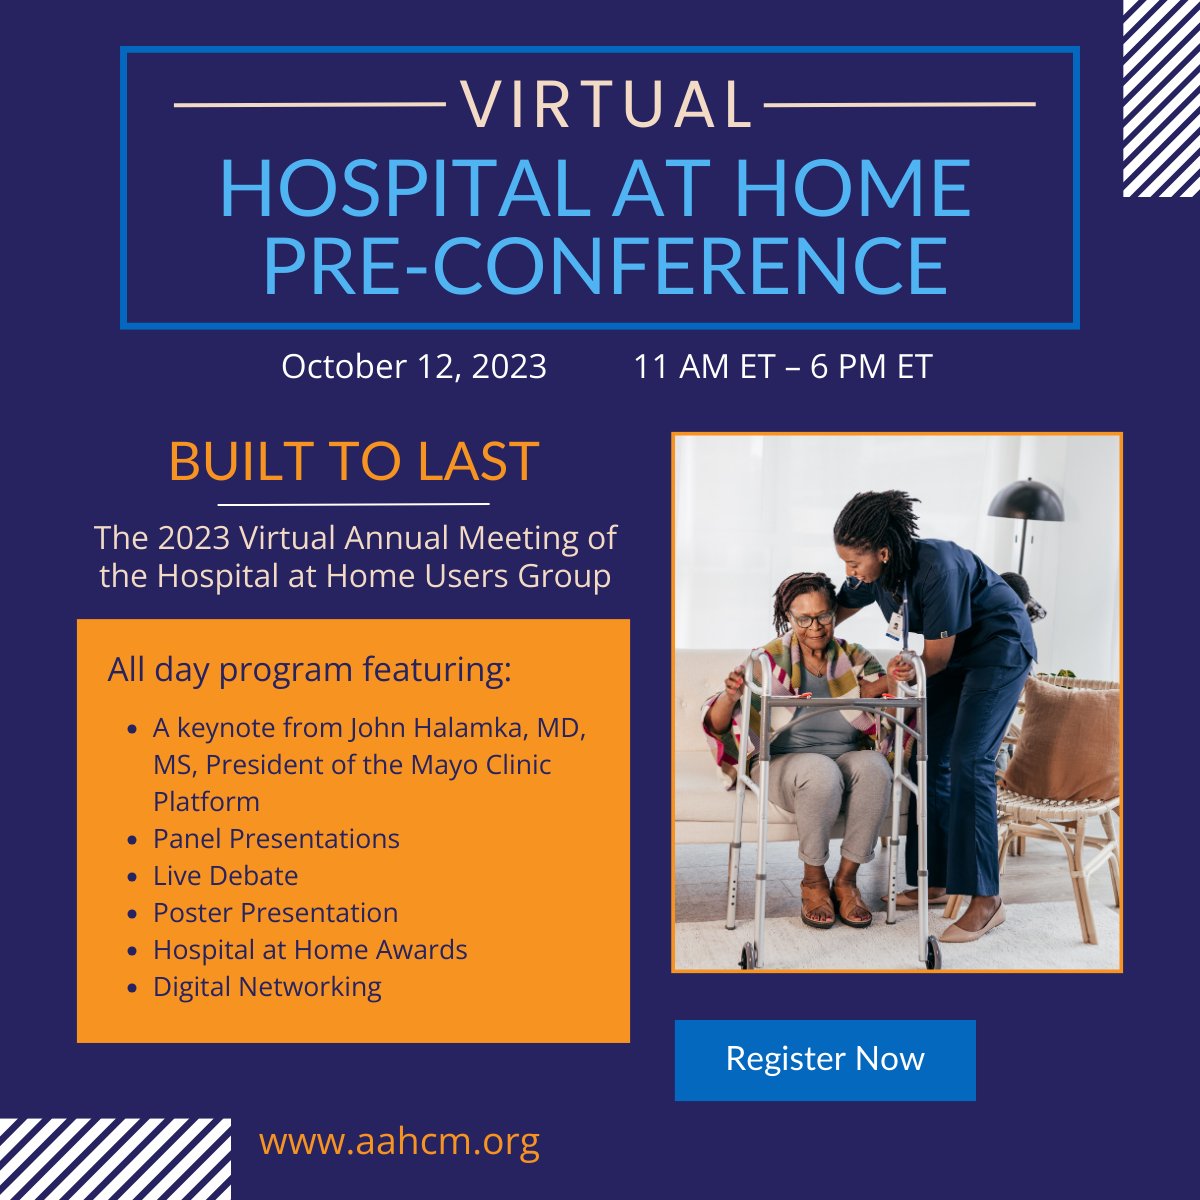 Can't make it to Seattle? Check out Built to Last: the 2023 Virtual Annual Meeting of the Hospital at Home Users Group This AAHCM pre-conference is available from the convenience of your computer from 11 AM ET – 6 PM ET on October 12. Register now at aahcm.org